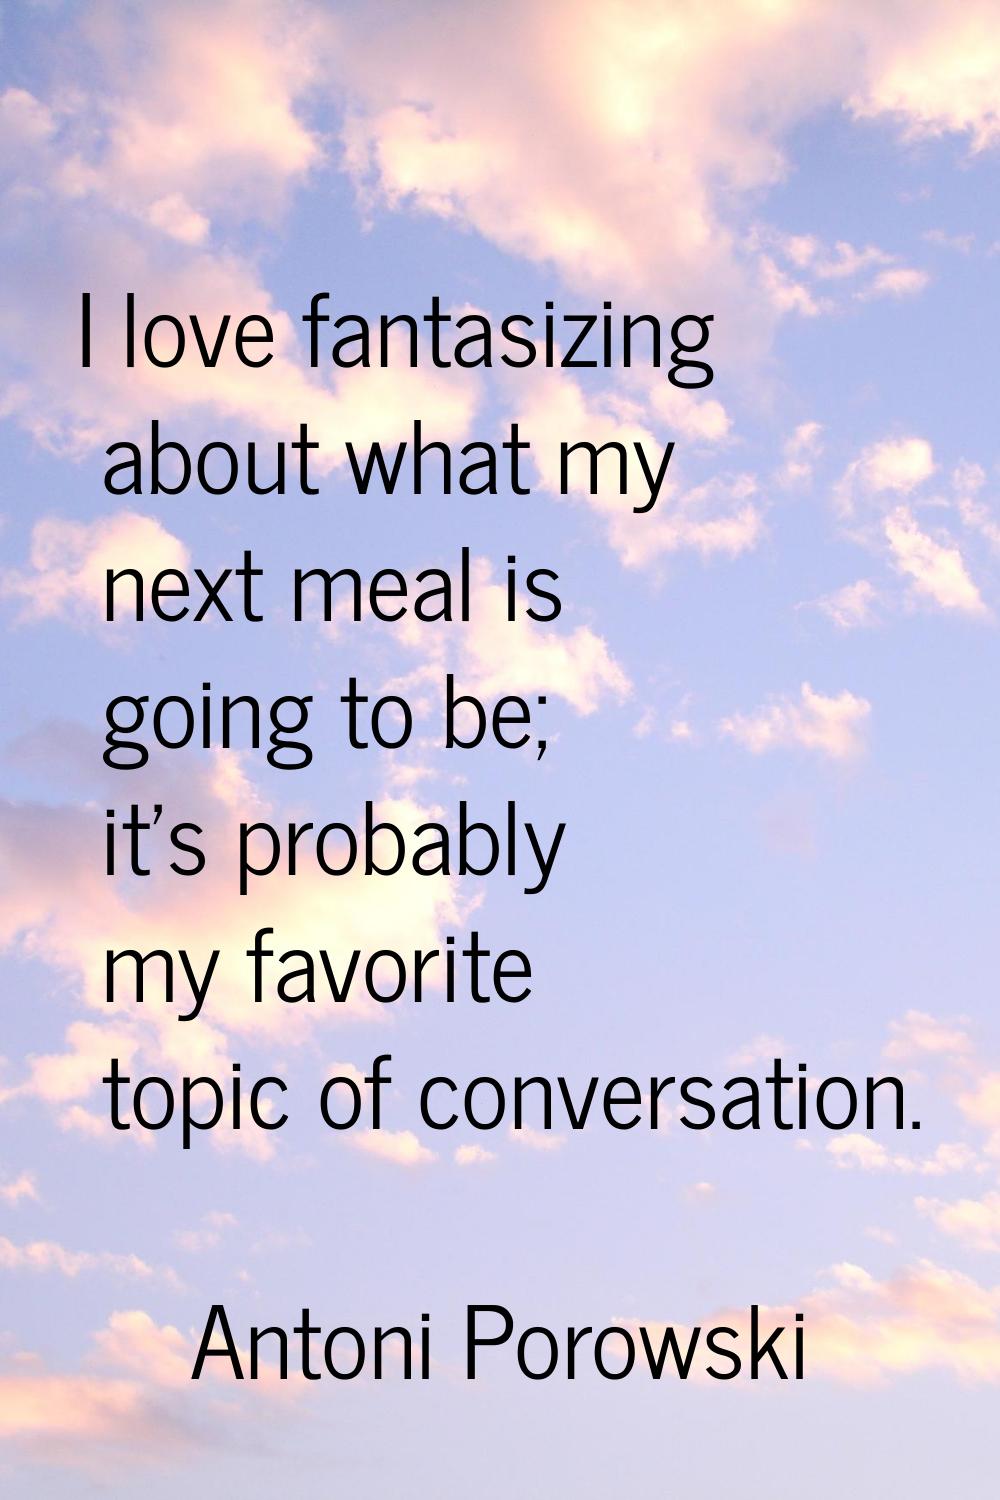 I love fantasizing about what my next meal is going to be; it's probably my favorite topic of conve